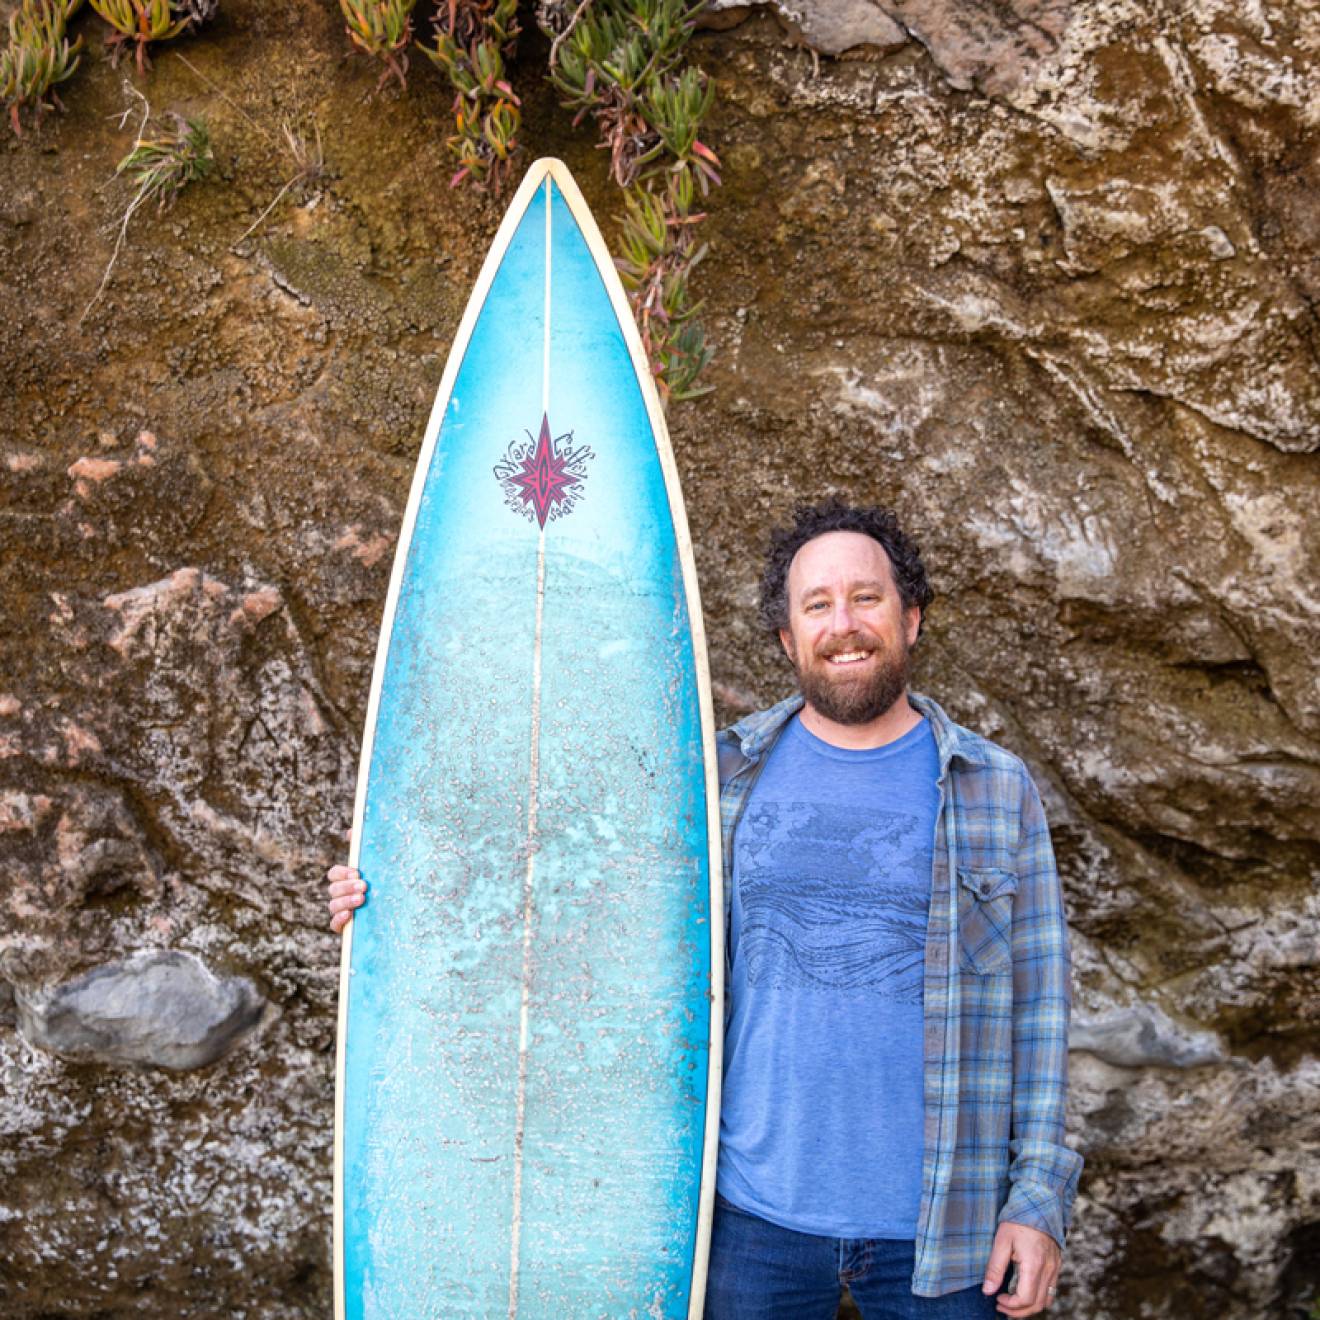 David Schulkin stands with his surfboard